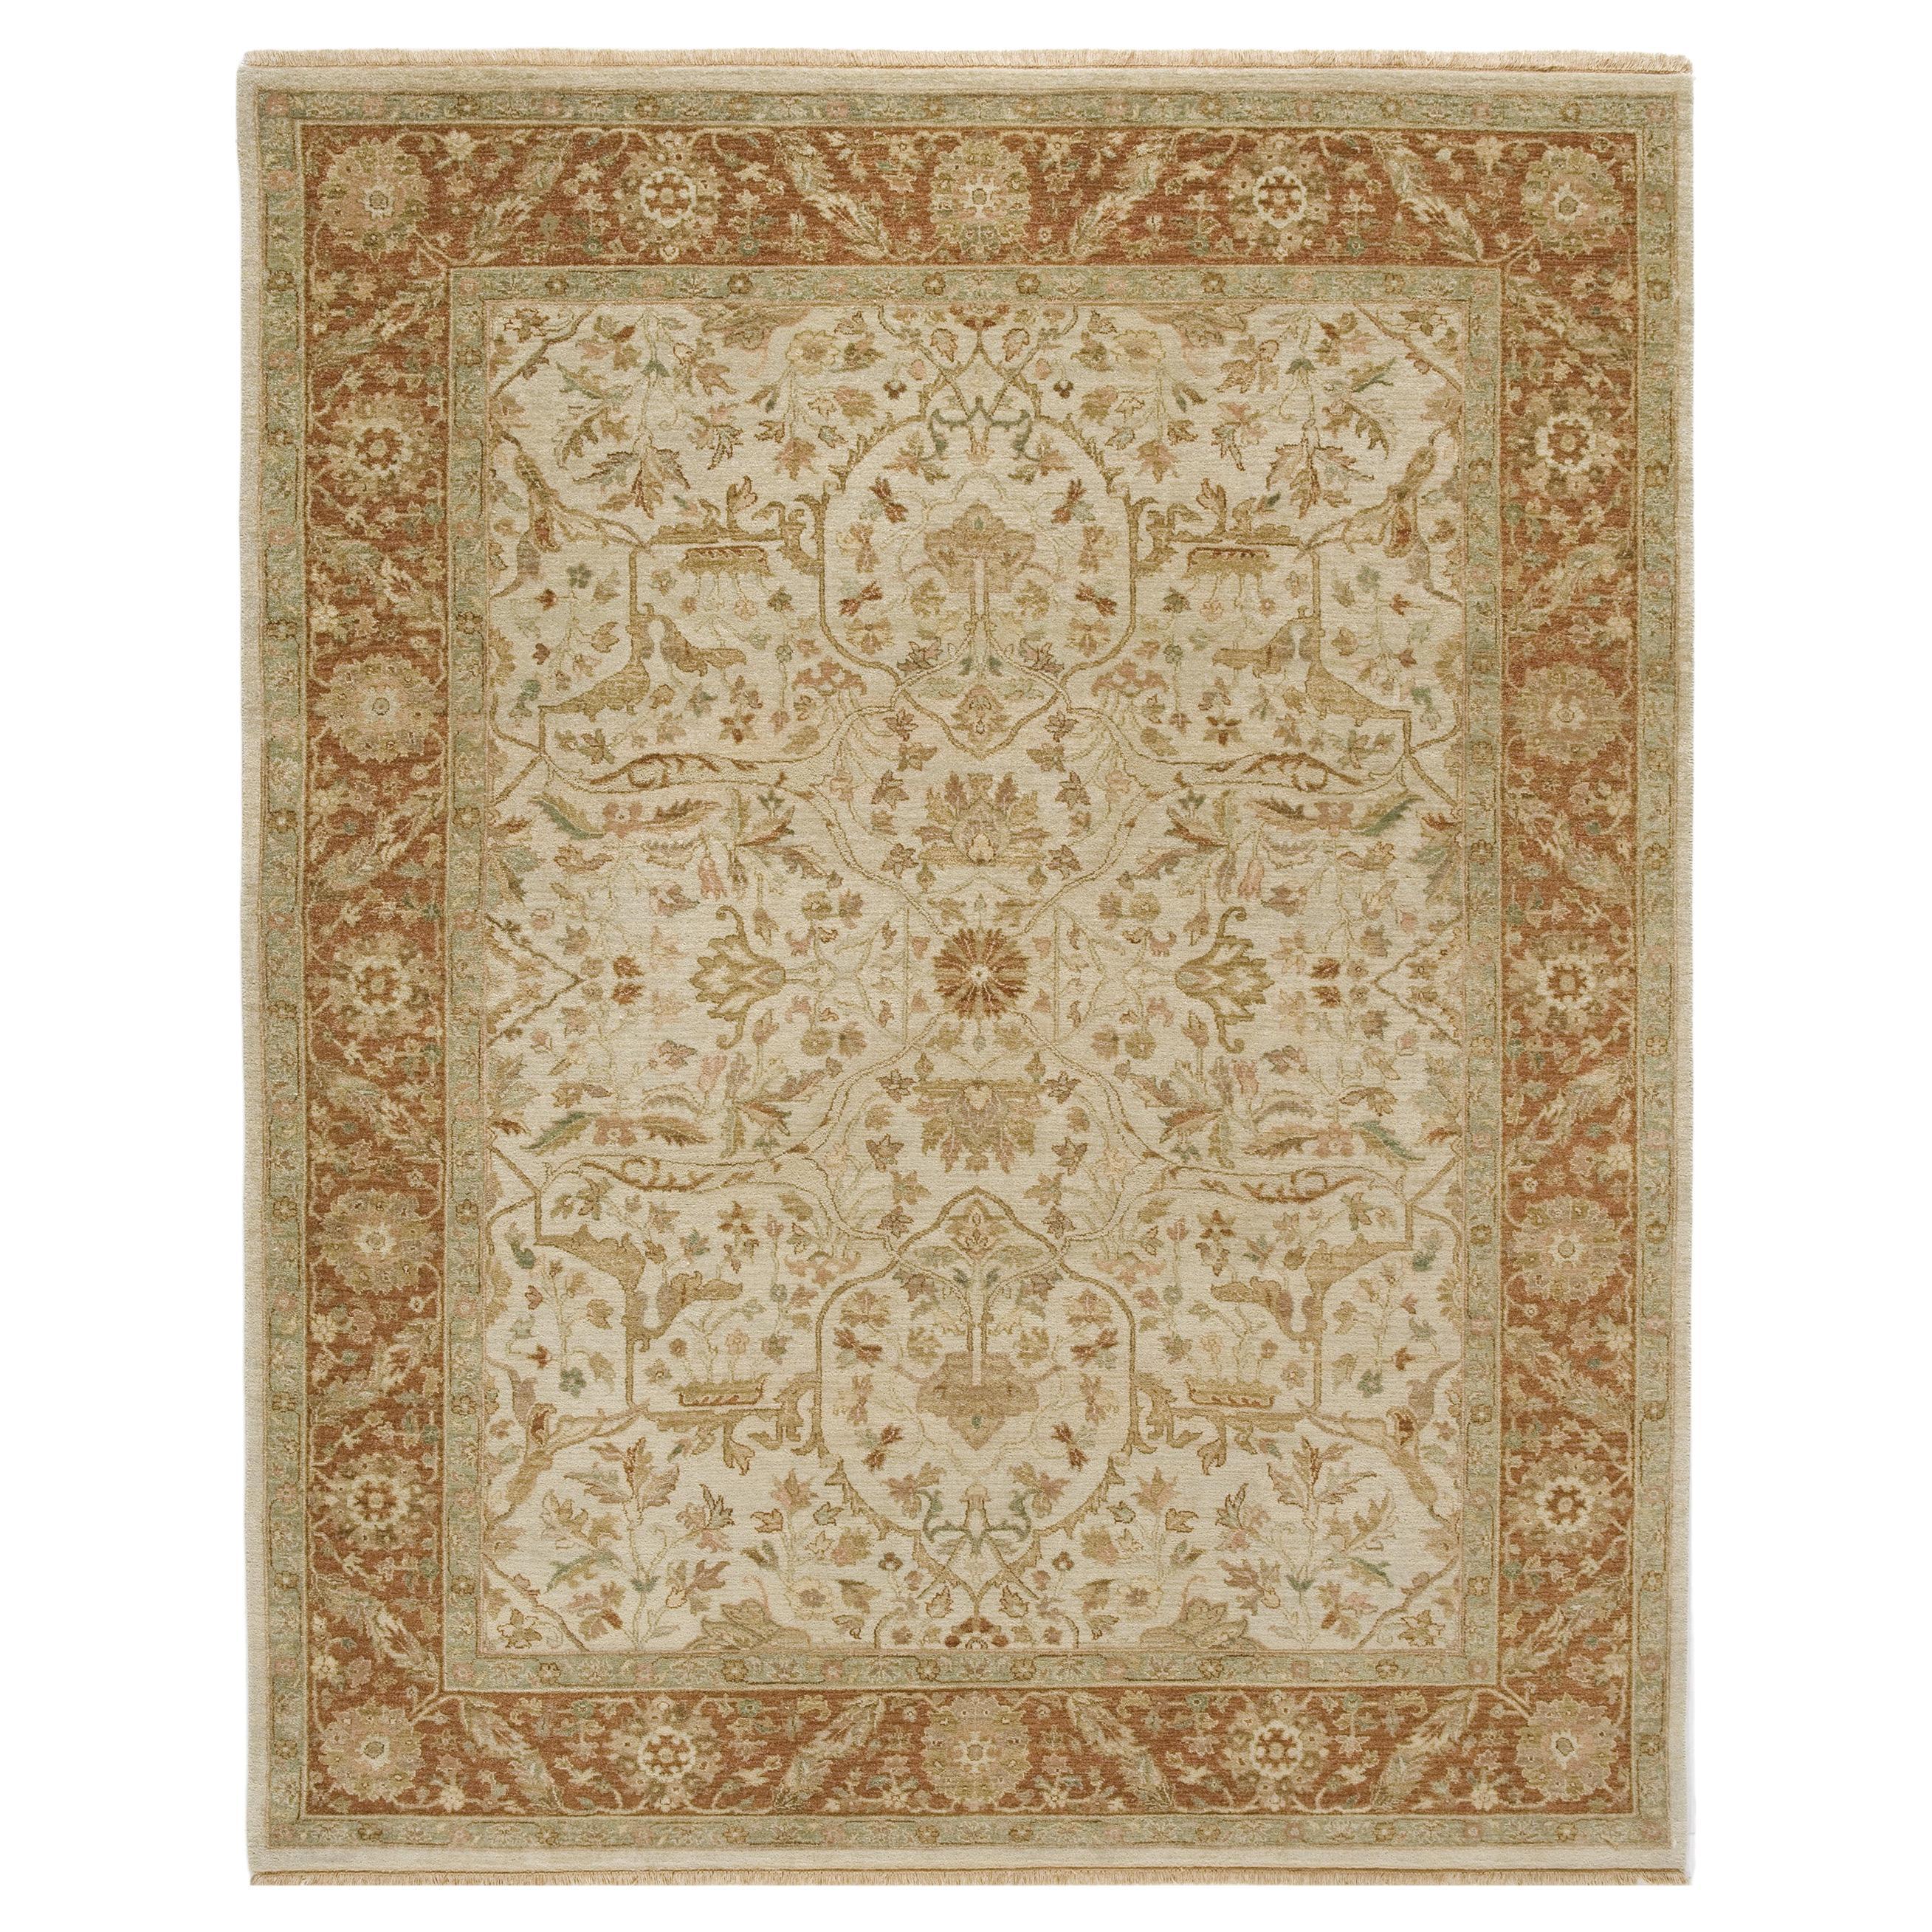 Luxury Traditional Hand-Knotted Ivory/Bronze 12x18 Rug